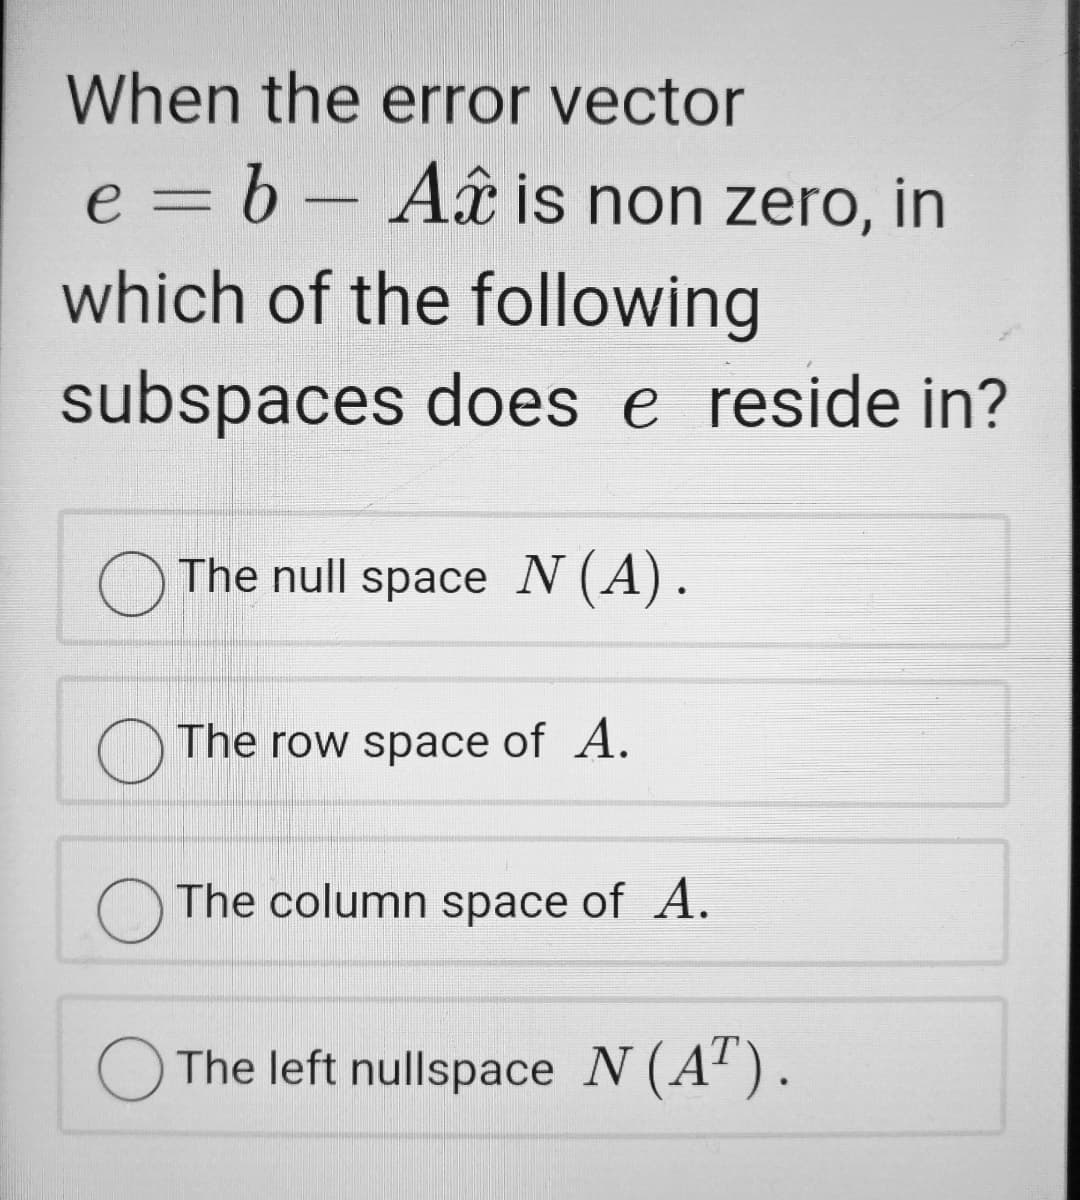 When the error vector
e = b - Aâ is non zero, in
which of the following
subspaces does e reside in?
O The null space N (A).
O The row space of A.
The column space of A.
O The left nullspace N (A').
